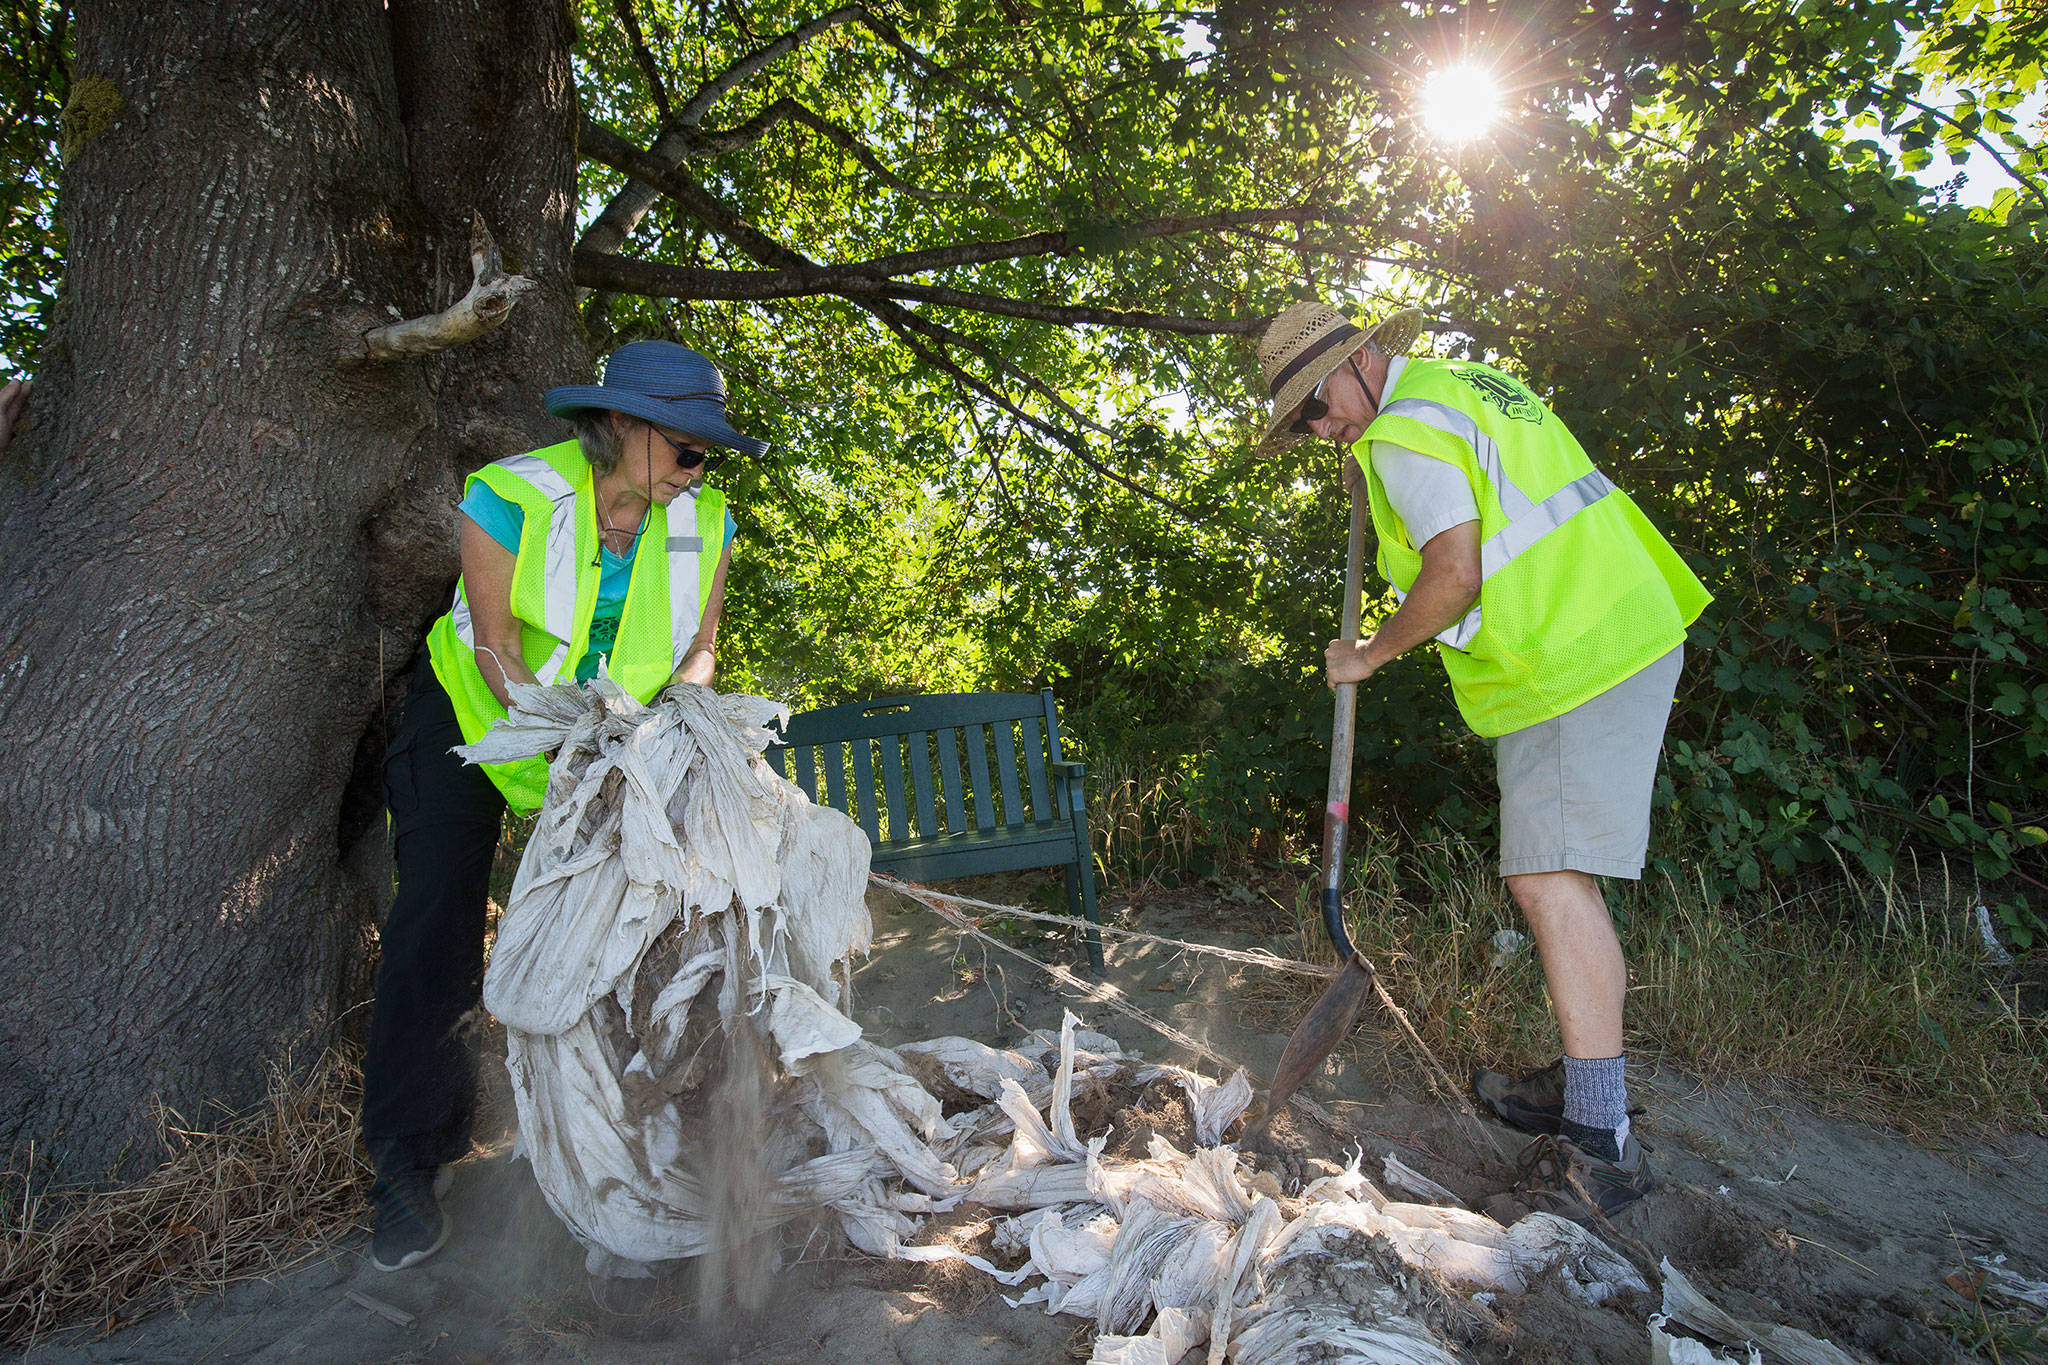 Lions Club treasurer Renee Deierling (left) and Mike Edwards pull out plastic and netting to clear a space for one of two benches they were installing at Pilchuck Julia Landing on Aug. 4 in Snohomish. (Andy Bronson / The Herald)